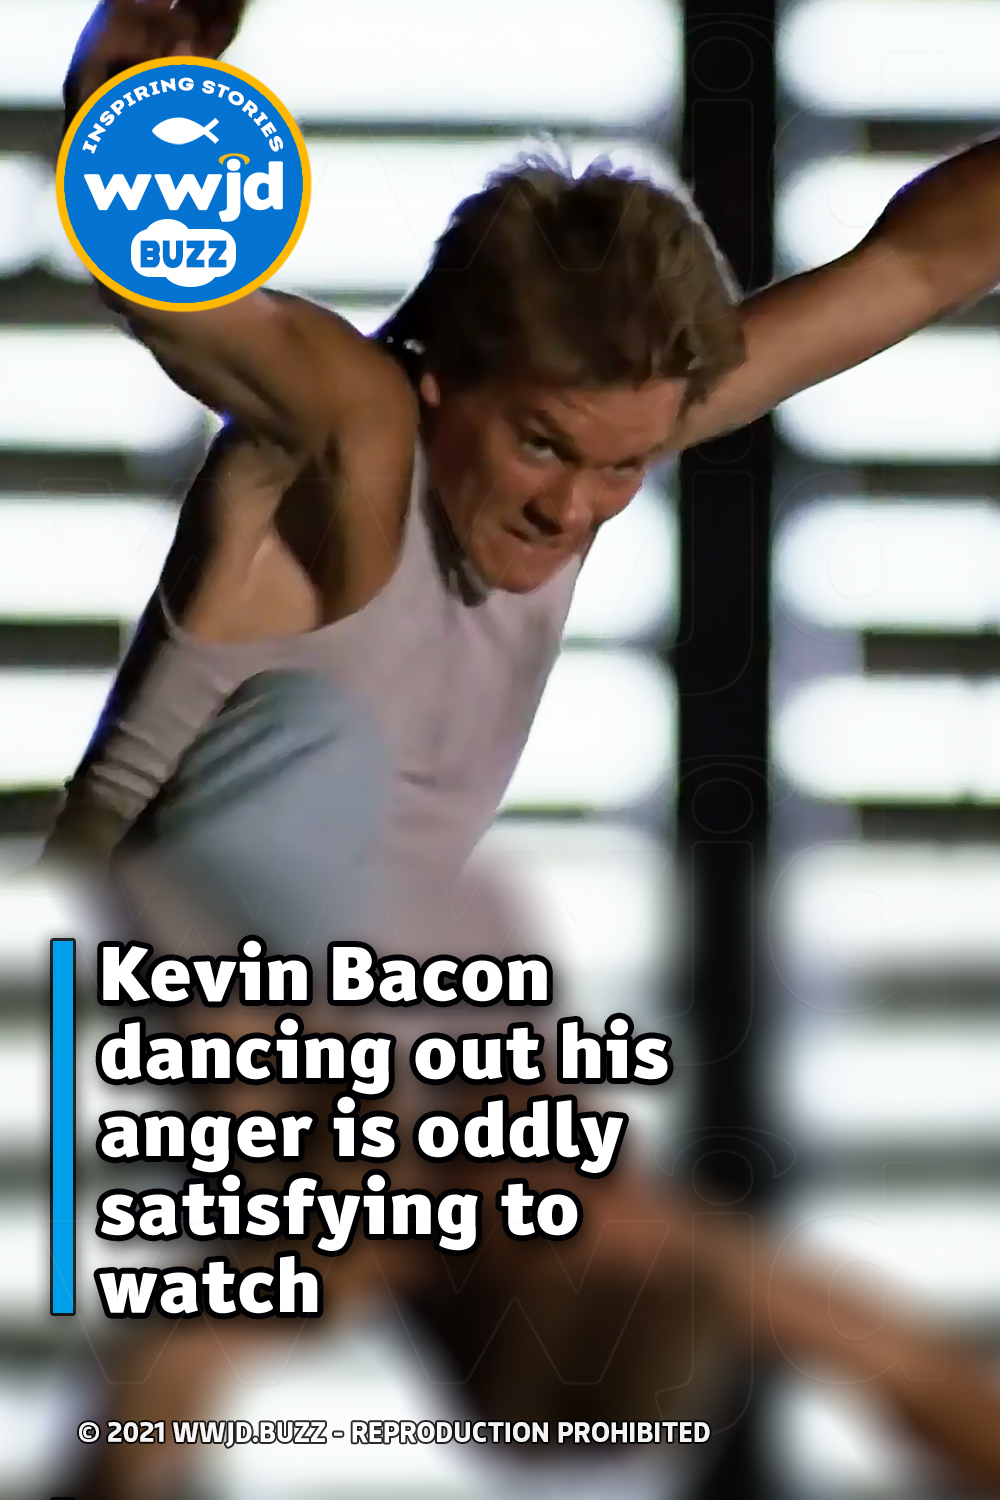 Kevin Bacon dancing out his anger is oddly satisfying to watch